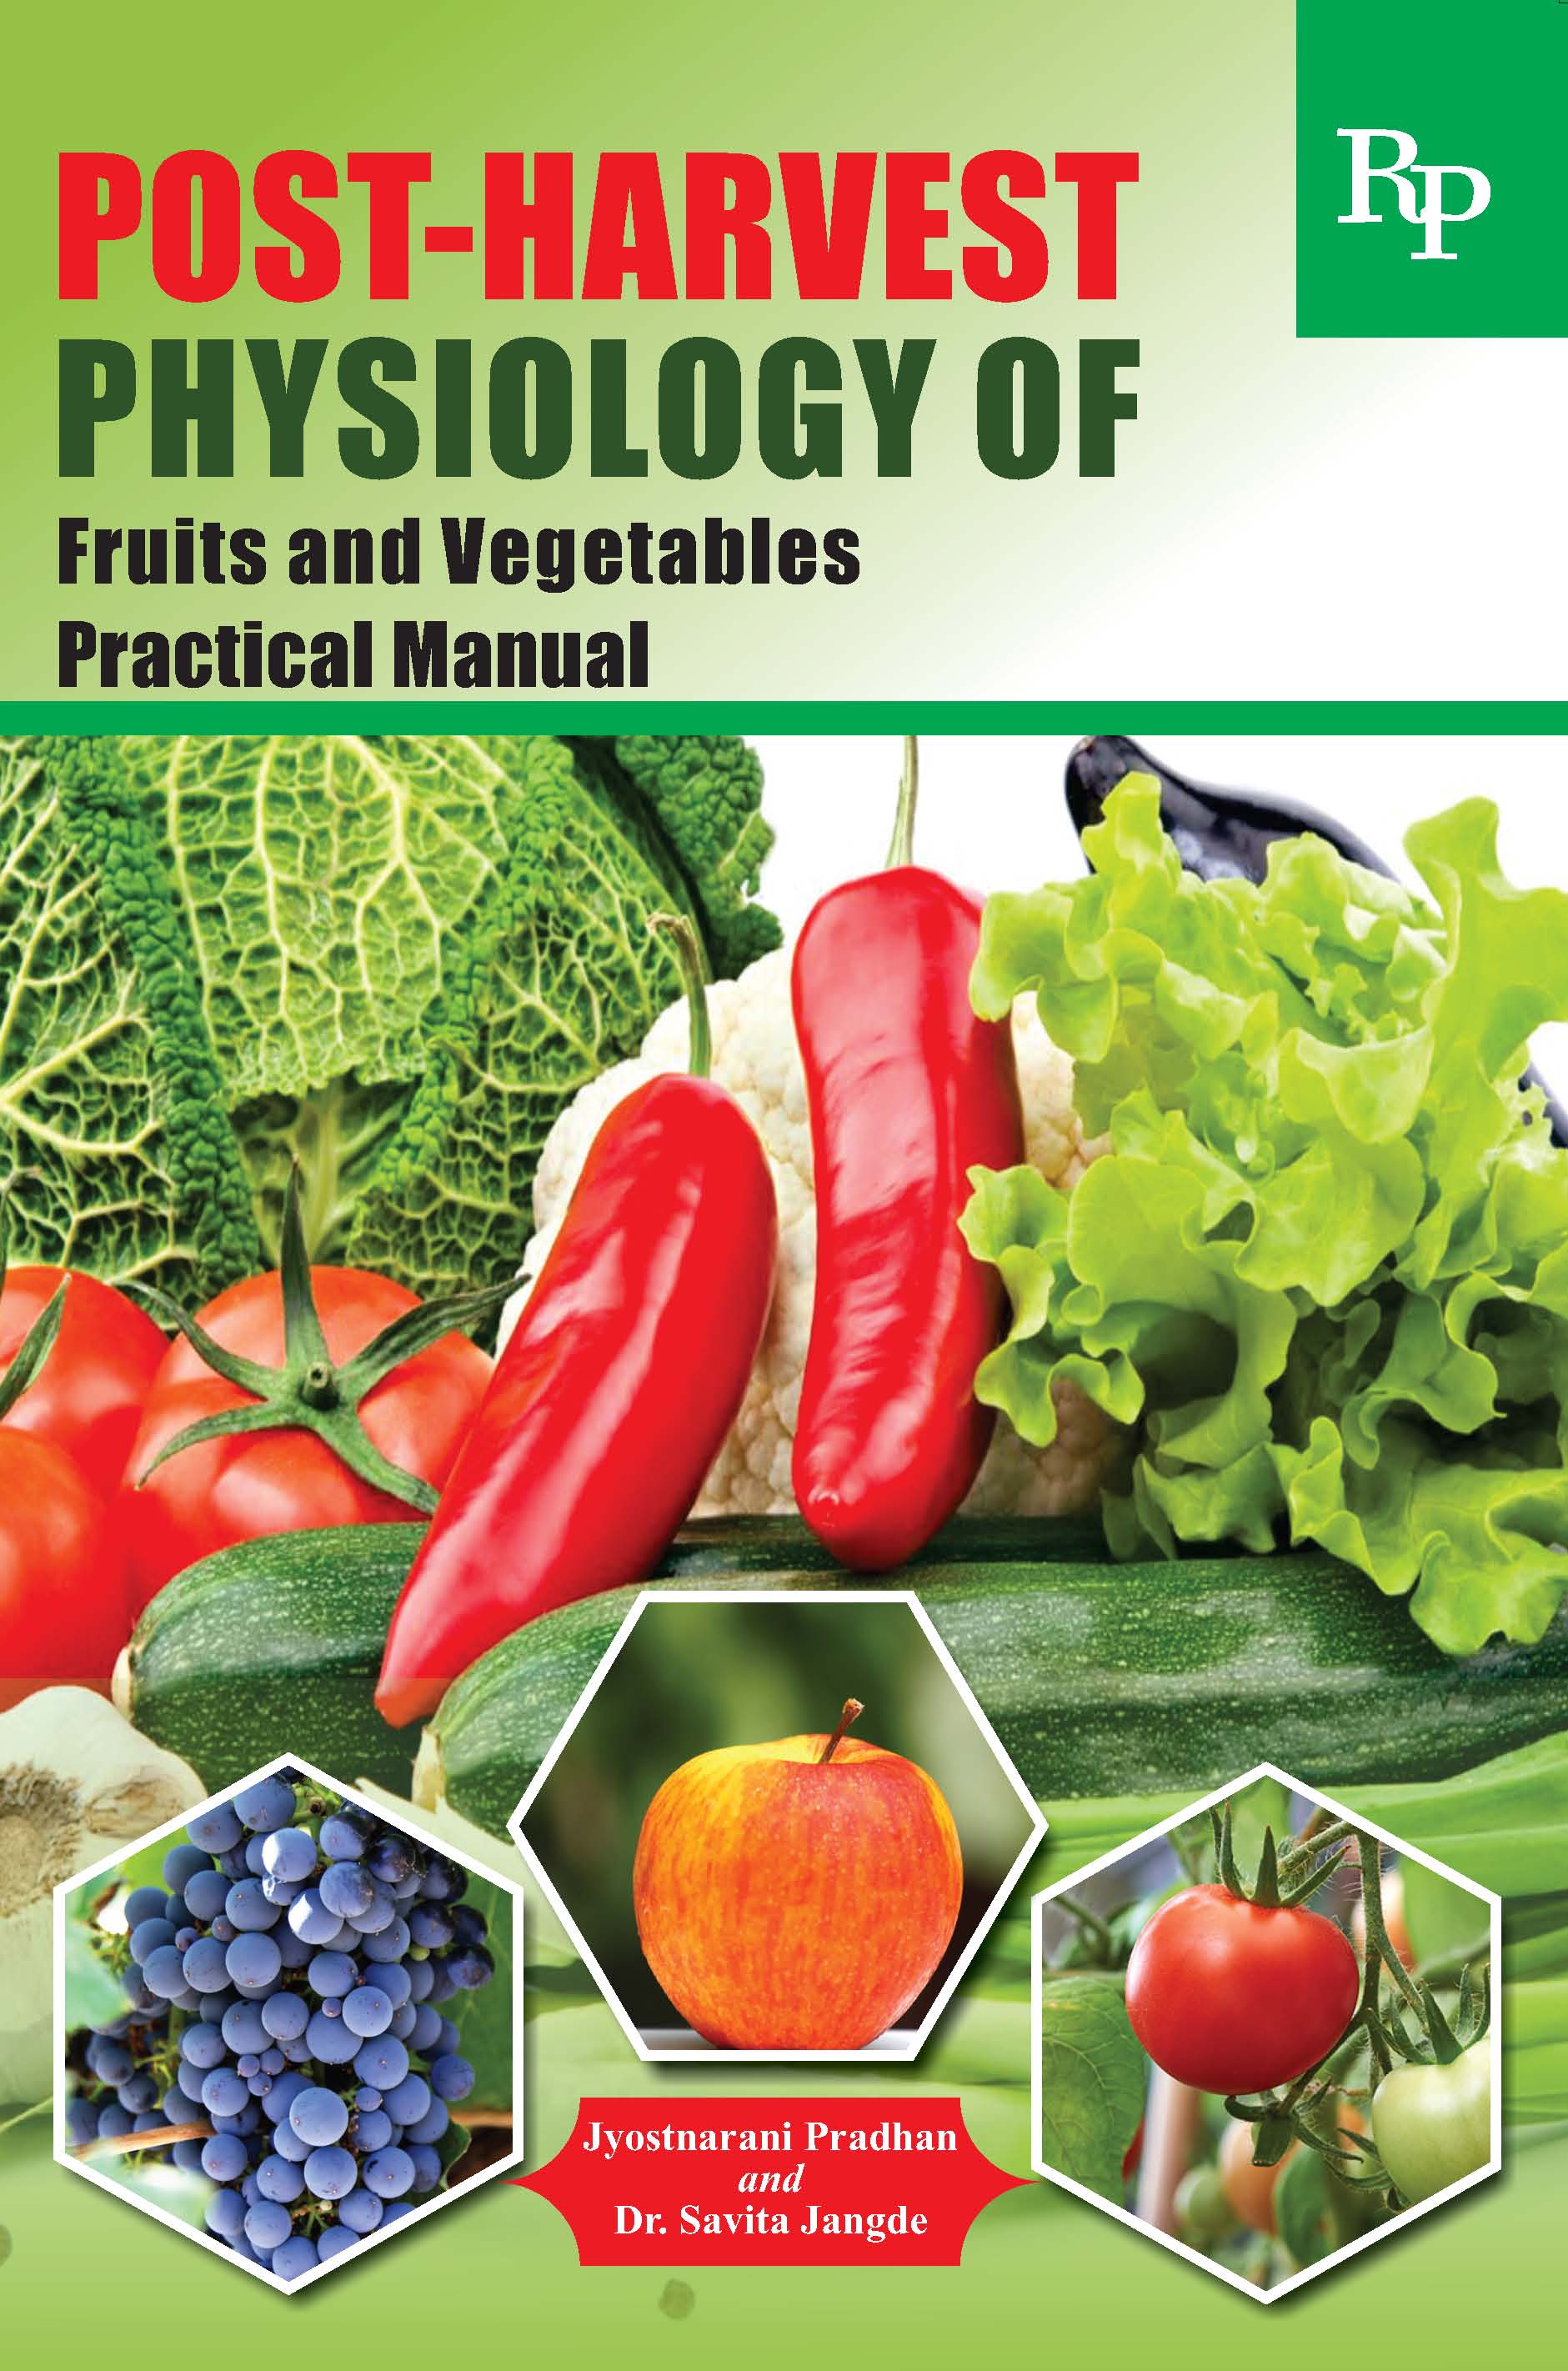 POST-HARVEST PHYSIOLOGY OF FRUITS AND VEGETABLES PRACTICAL MANUAL.jpg